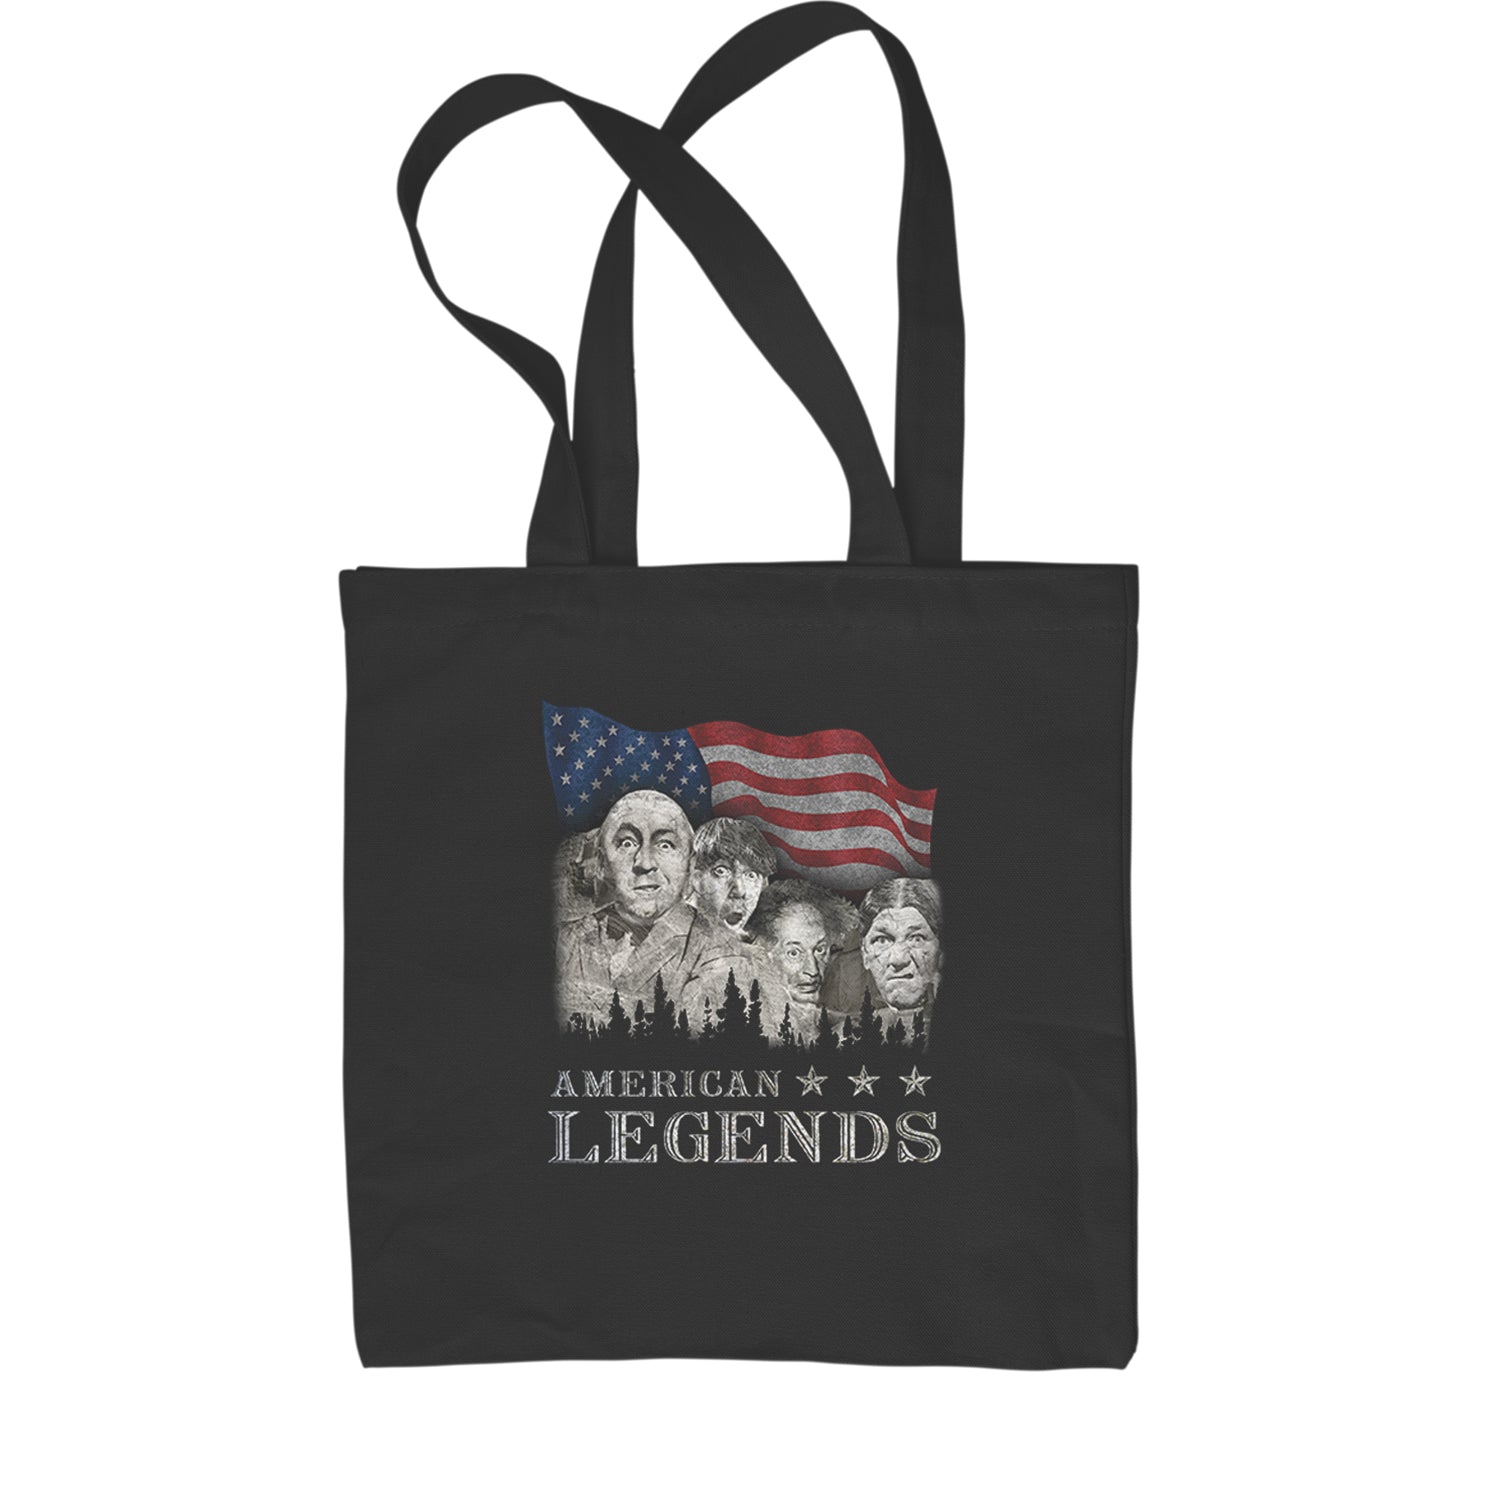 Mount RushMorons 3 Stooges Classic Retro TV Comedy Shopping Tote Bag